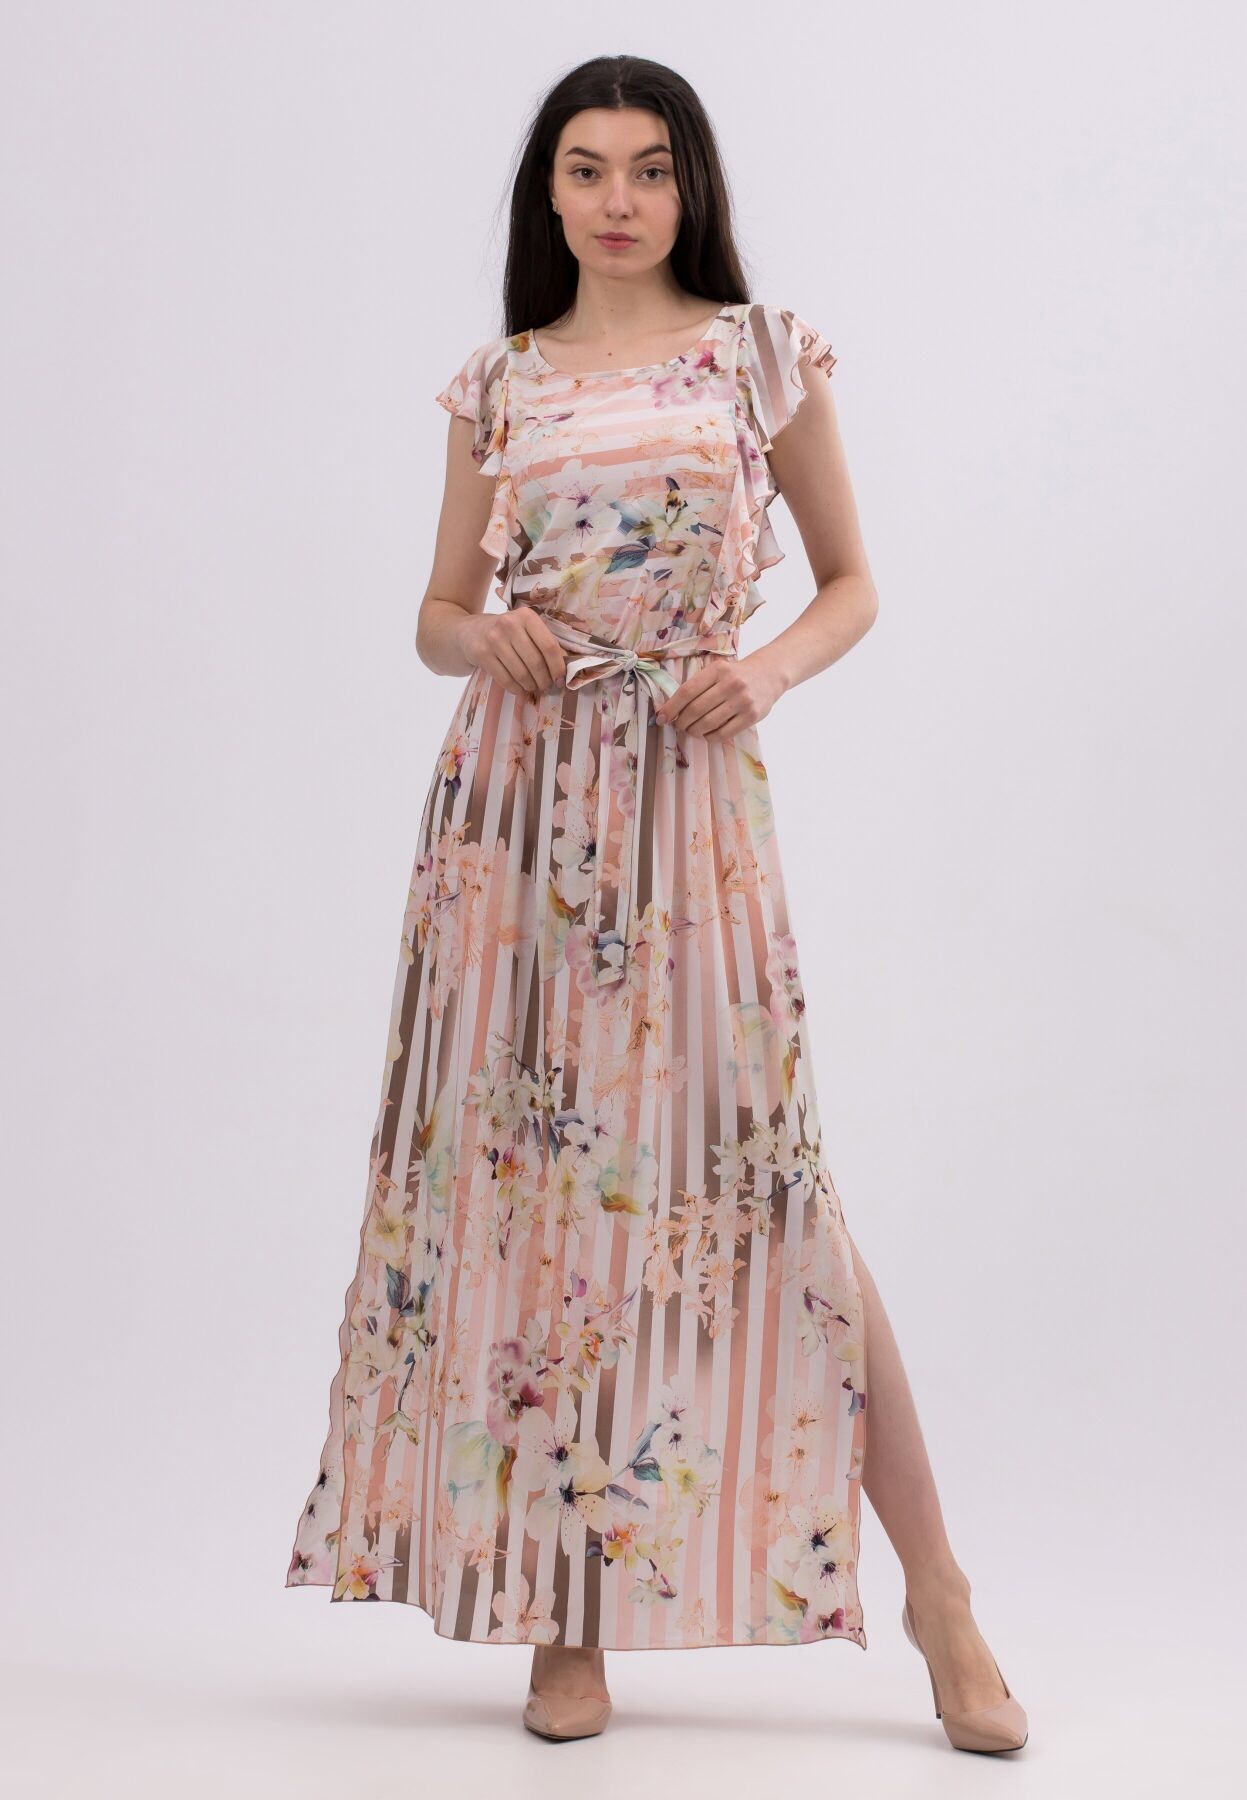 Stretch chiffon maxi dress with delicate floral print 5698